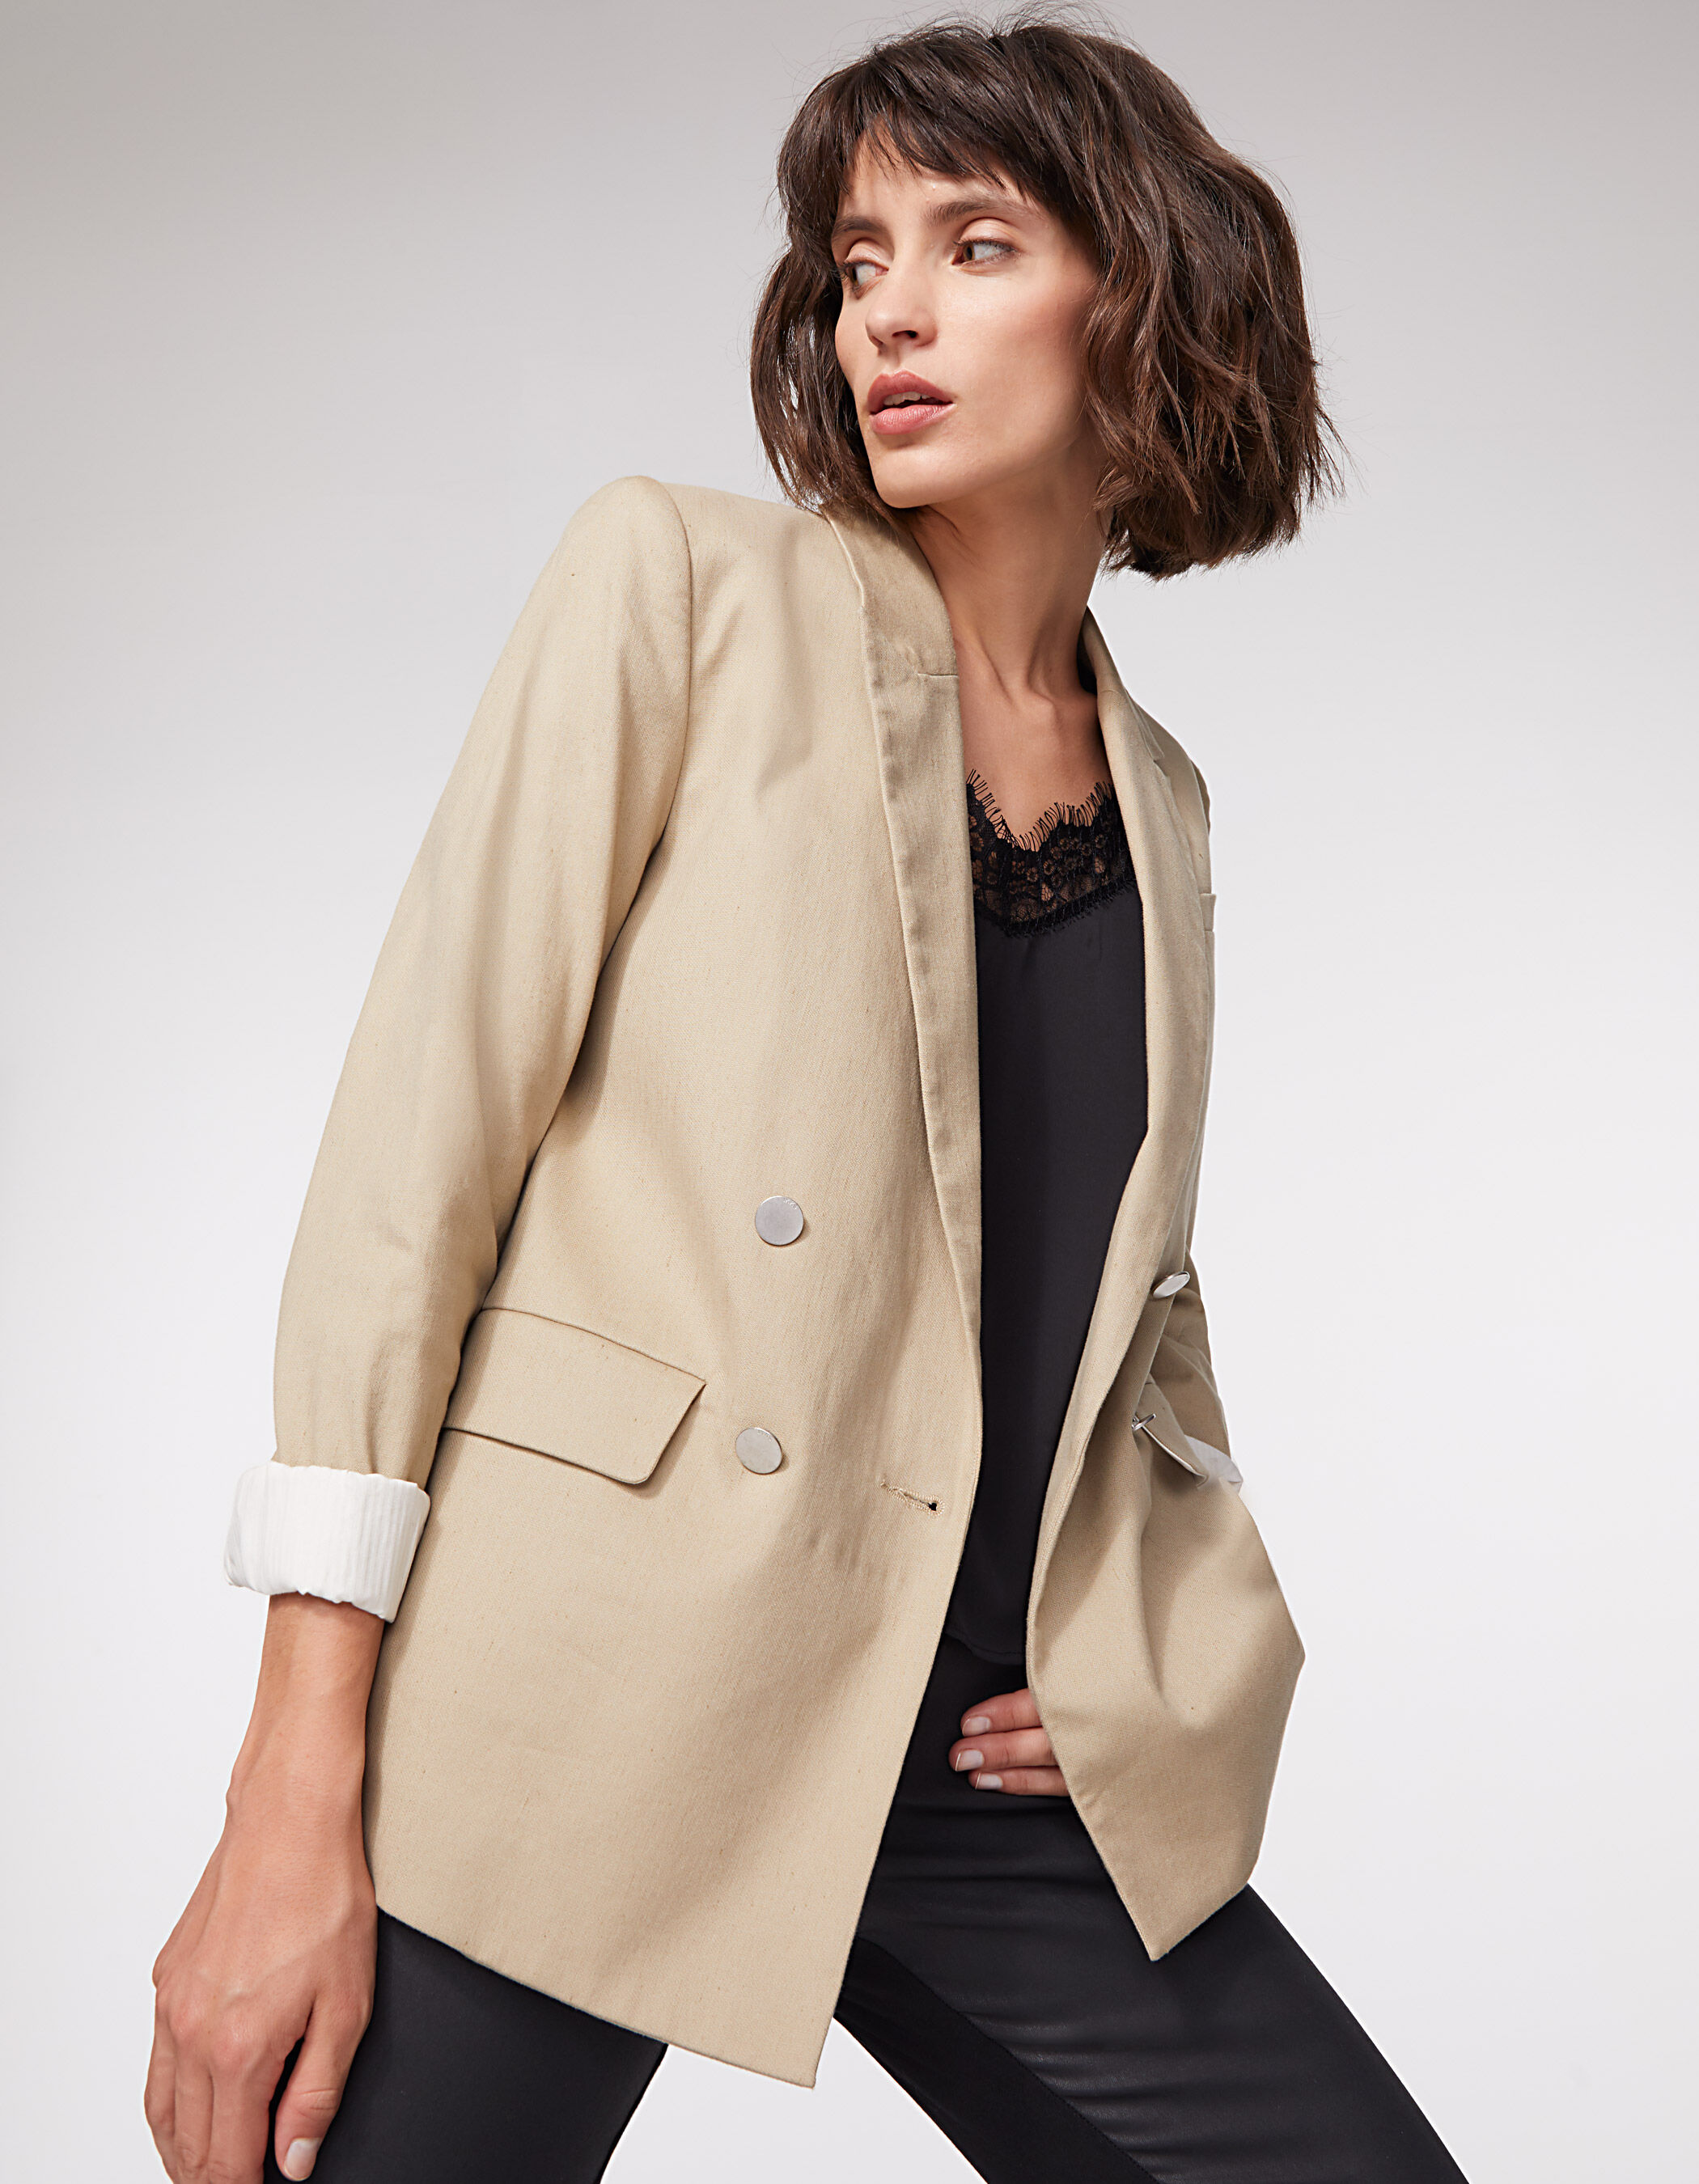 Search engine | Linen suits women, Womens suits business, Suits for women